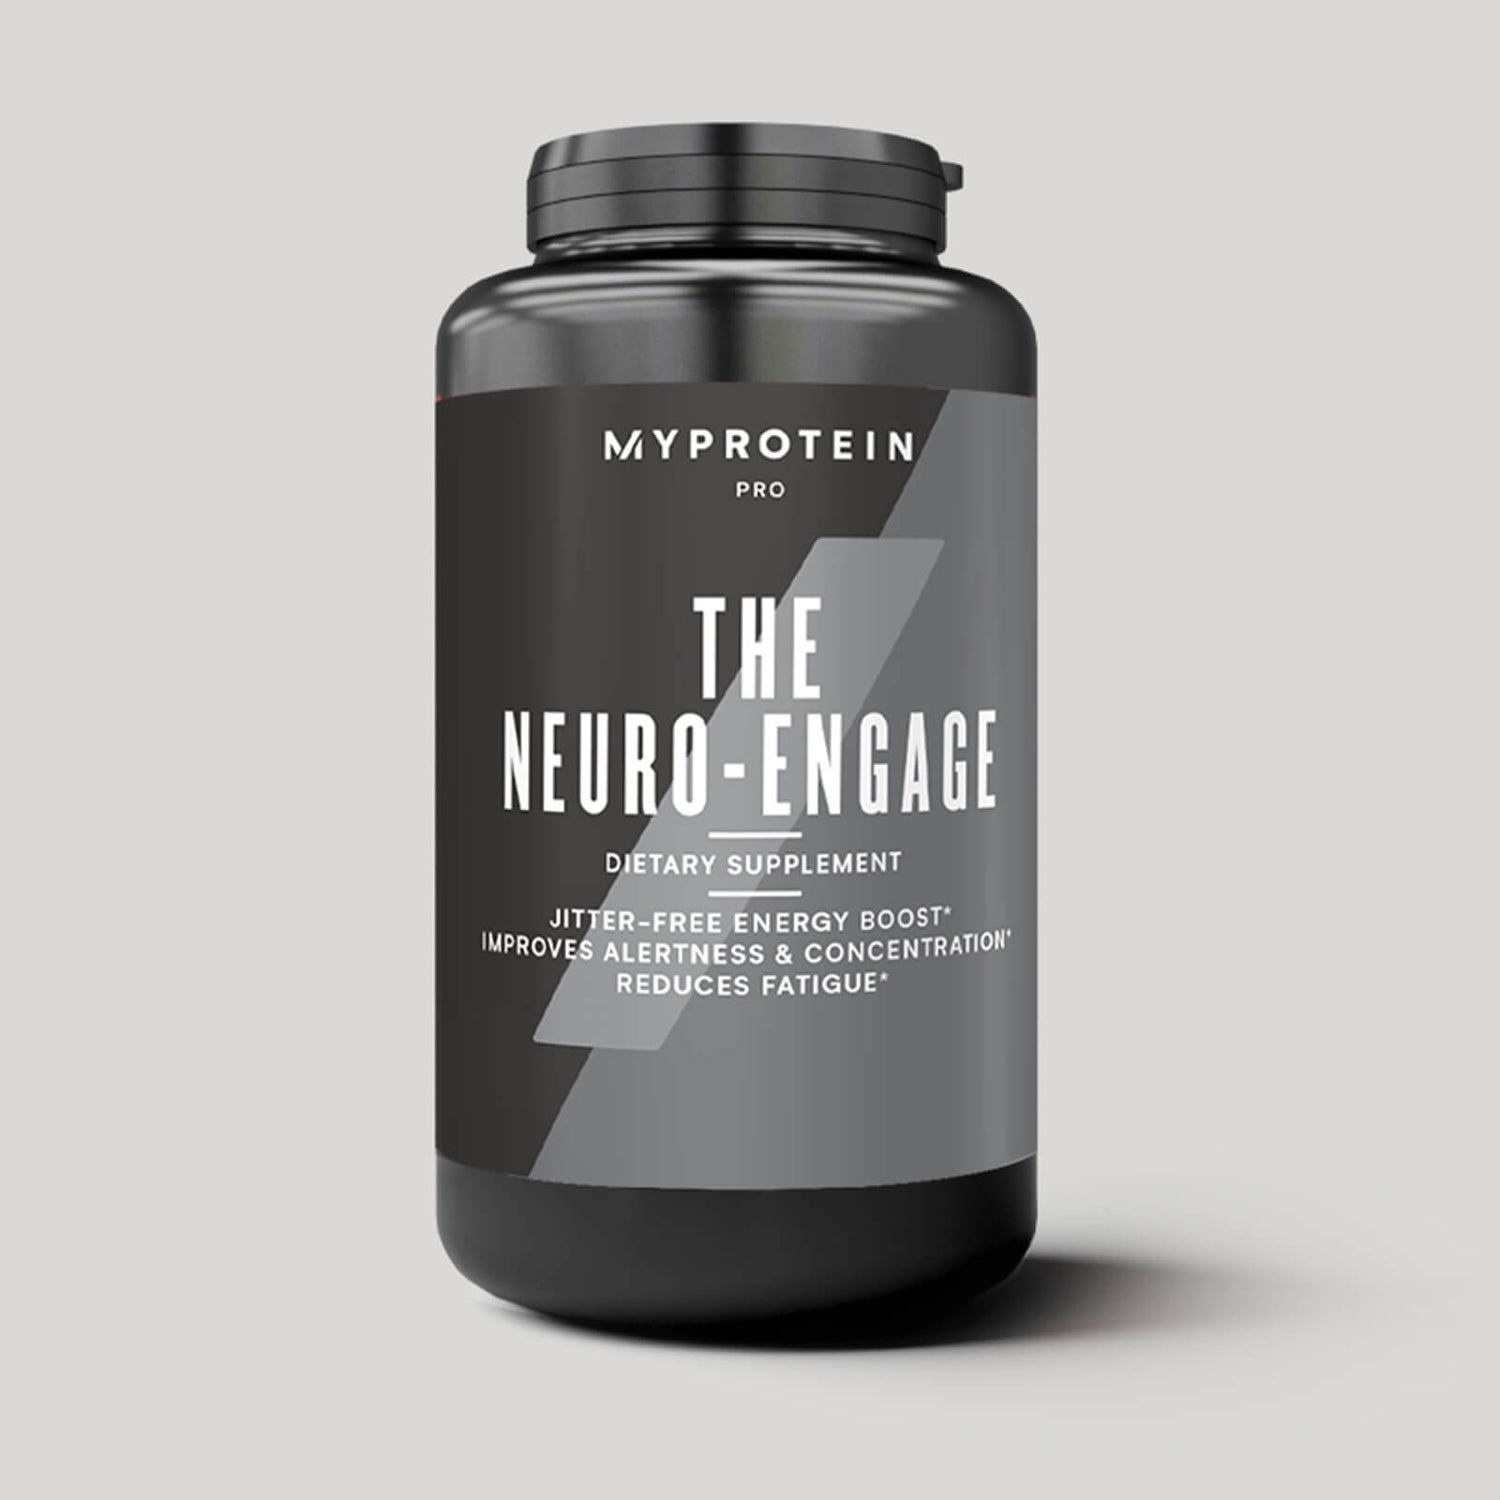 THE Neuro-Engage